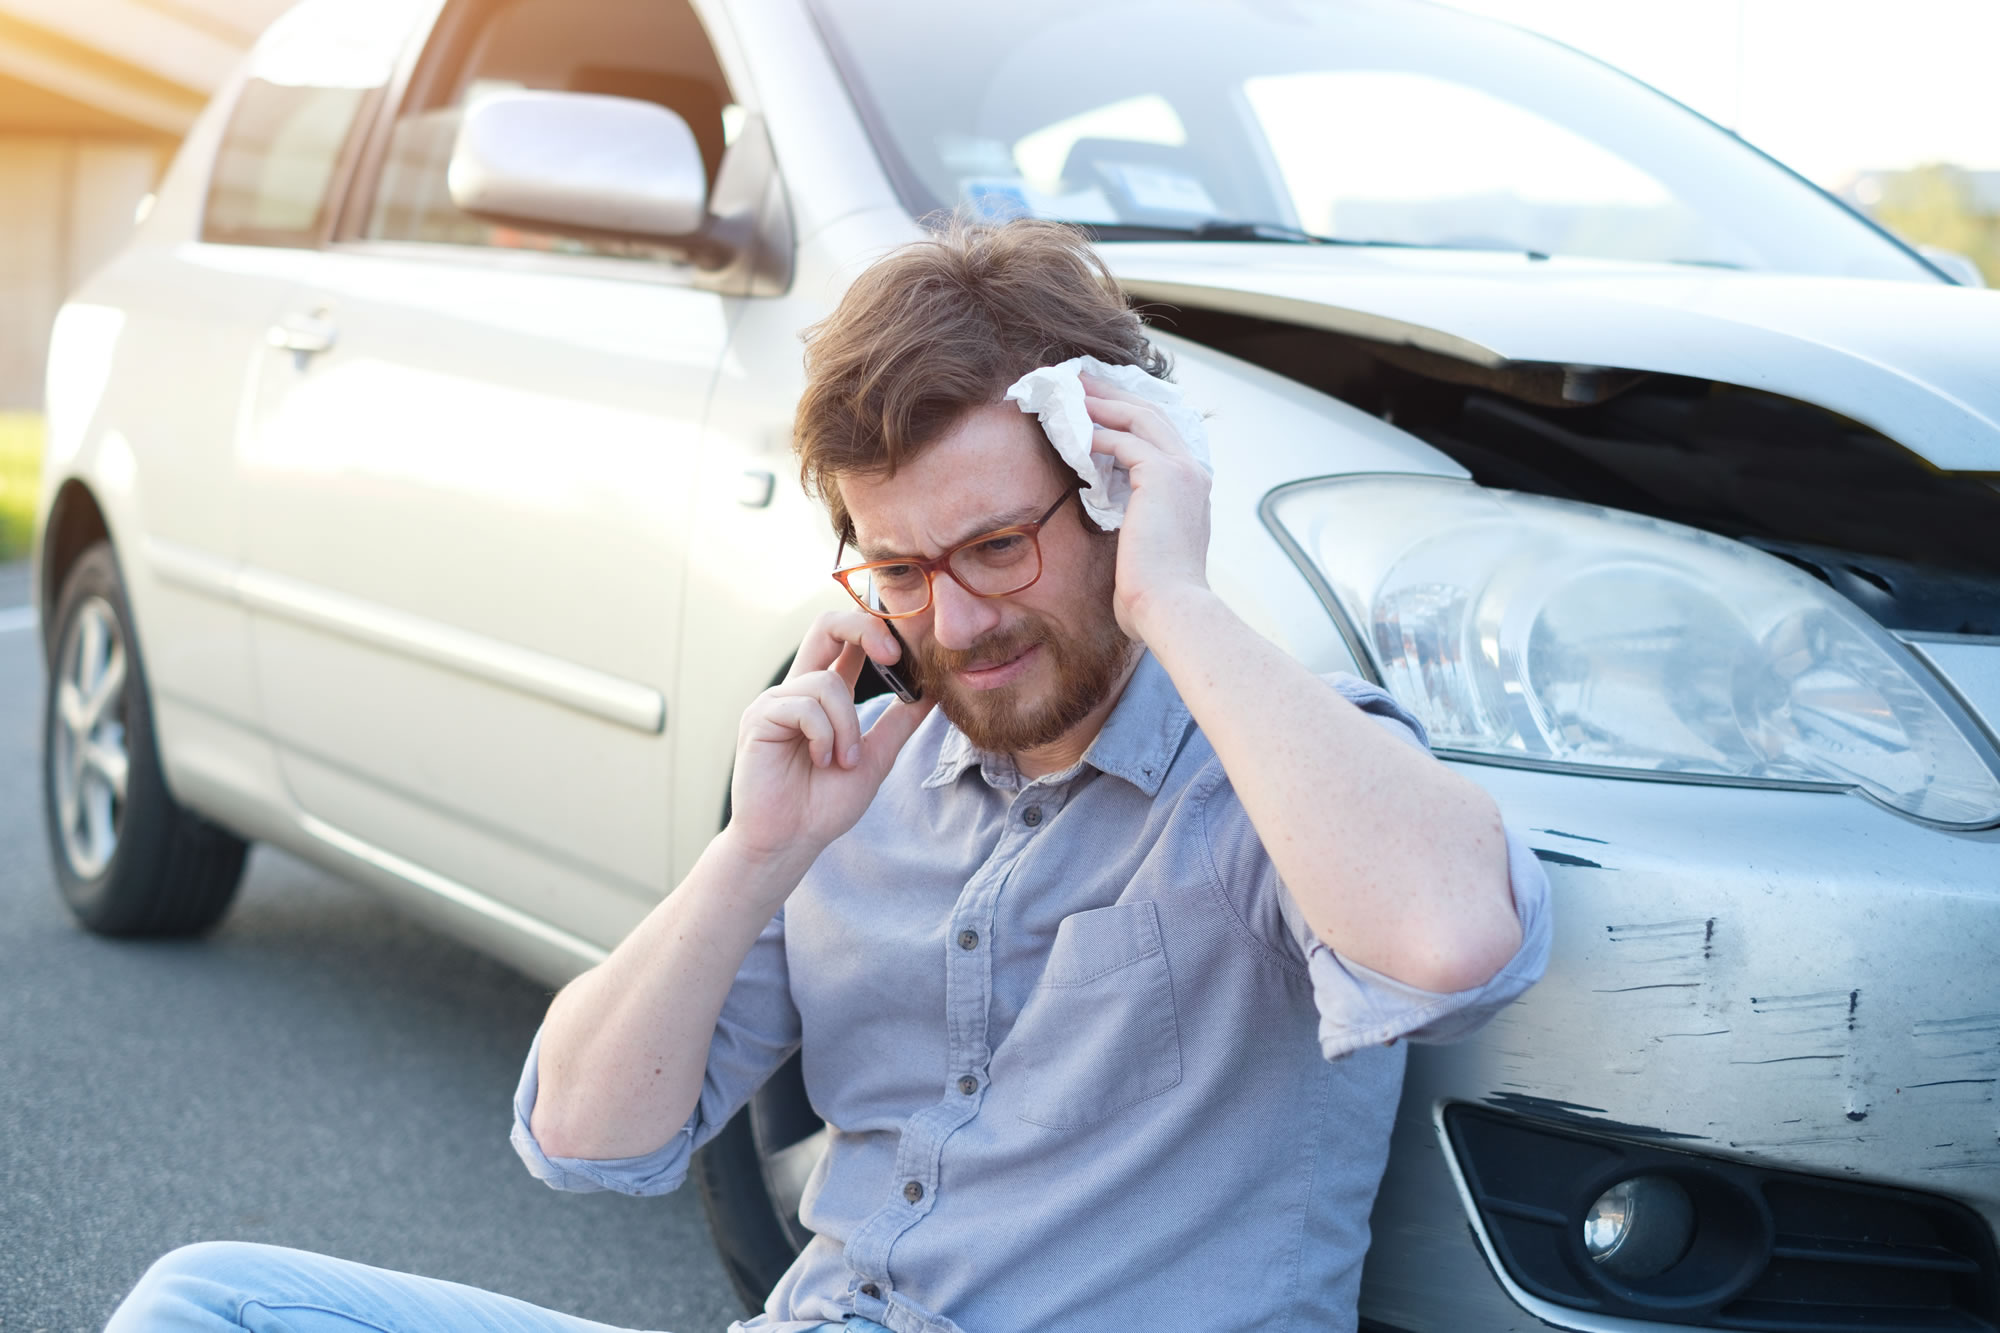 Road Traffic accident - Car Injury - auto accident claims